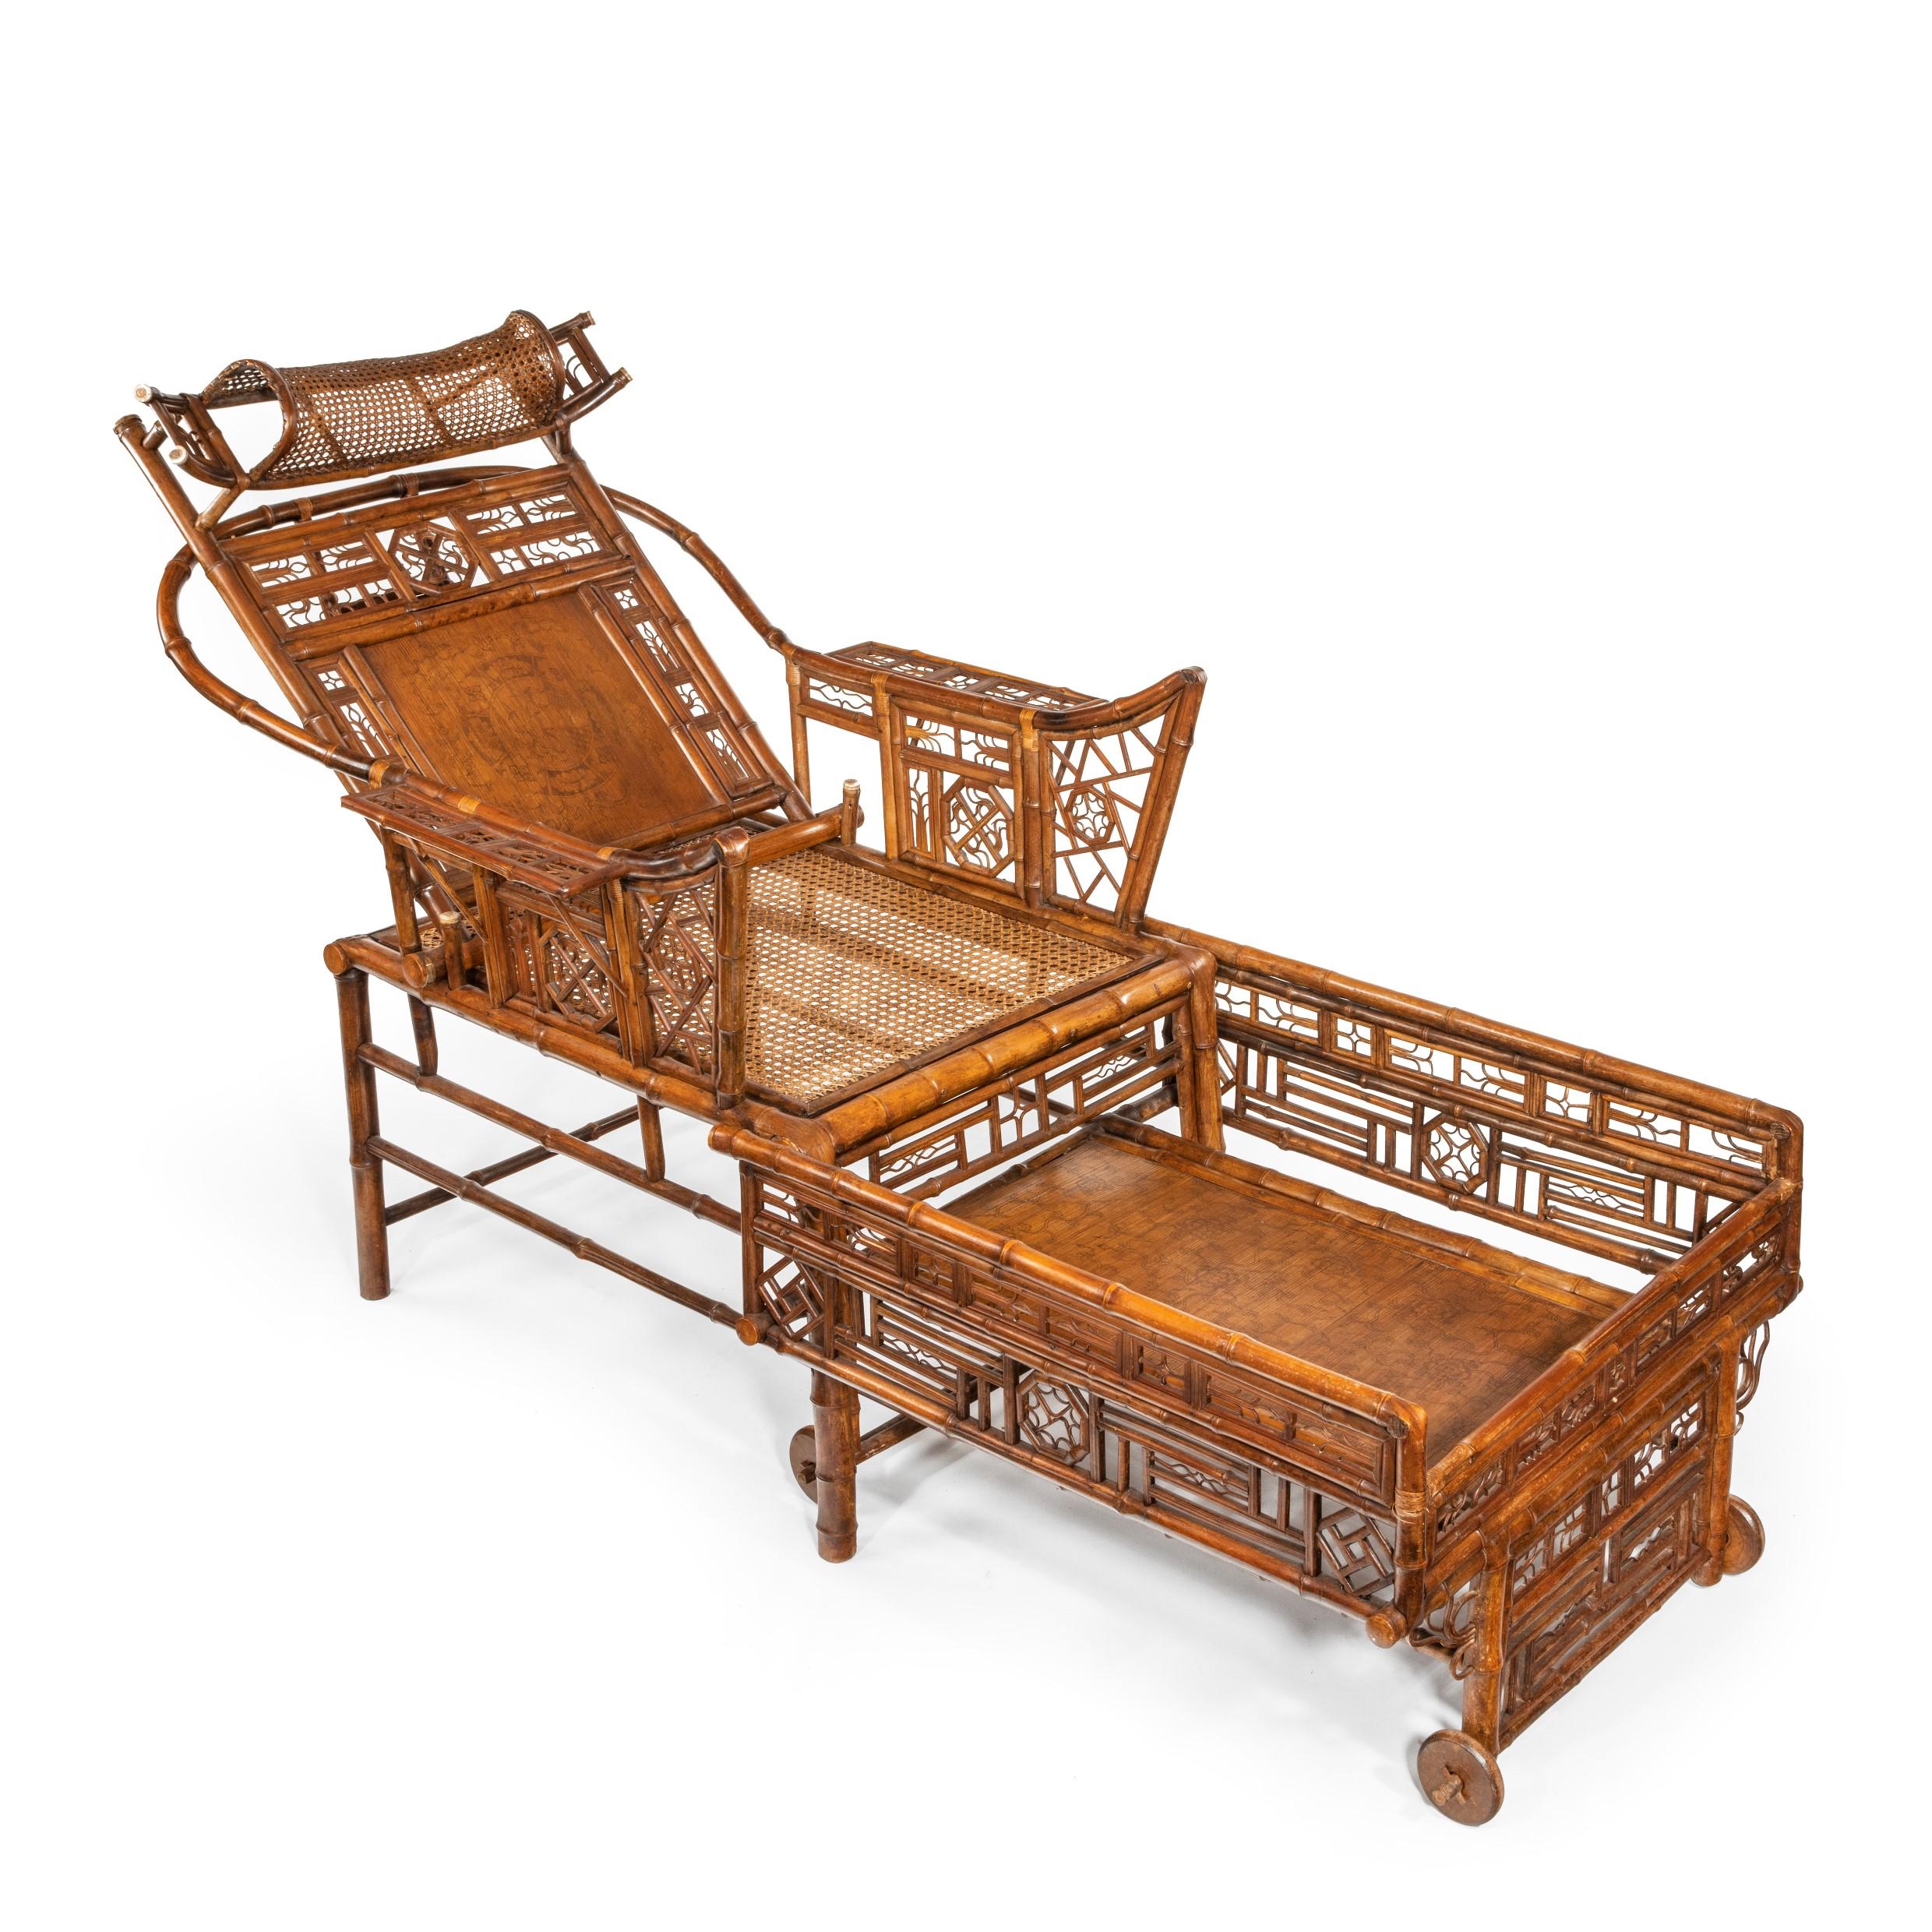 Early 19th Century Chinese Export ‘Brighton Pavilion’ Bamboo Adjustable Day Bed For Sale